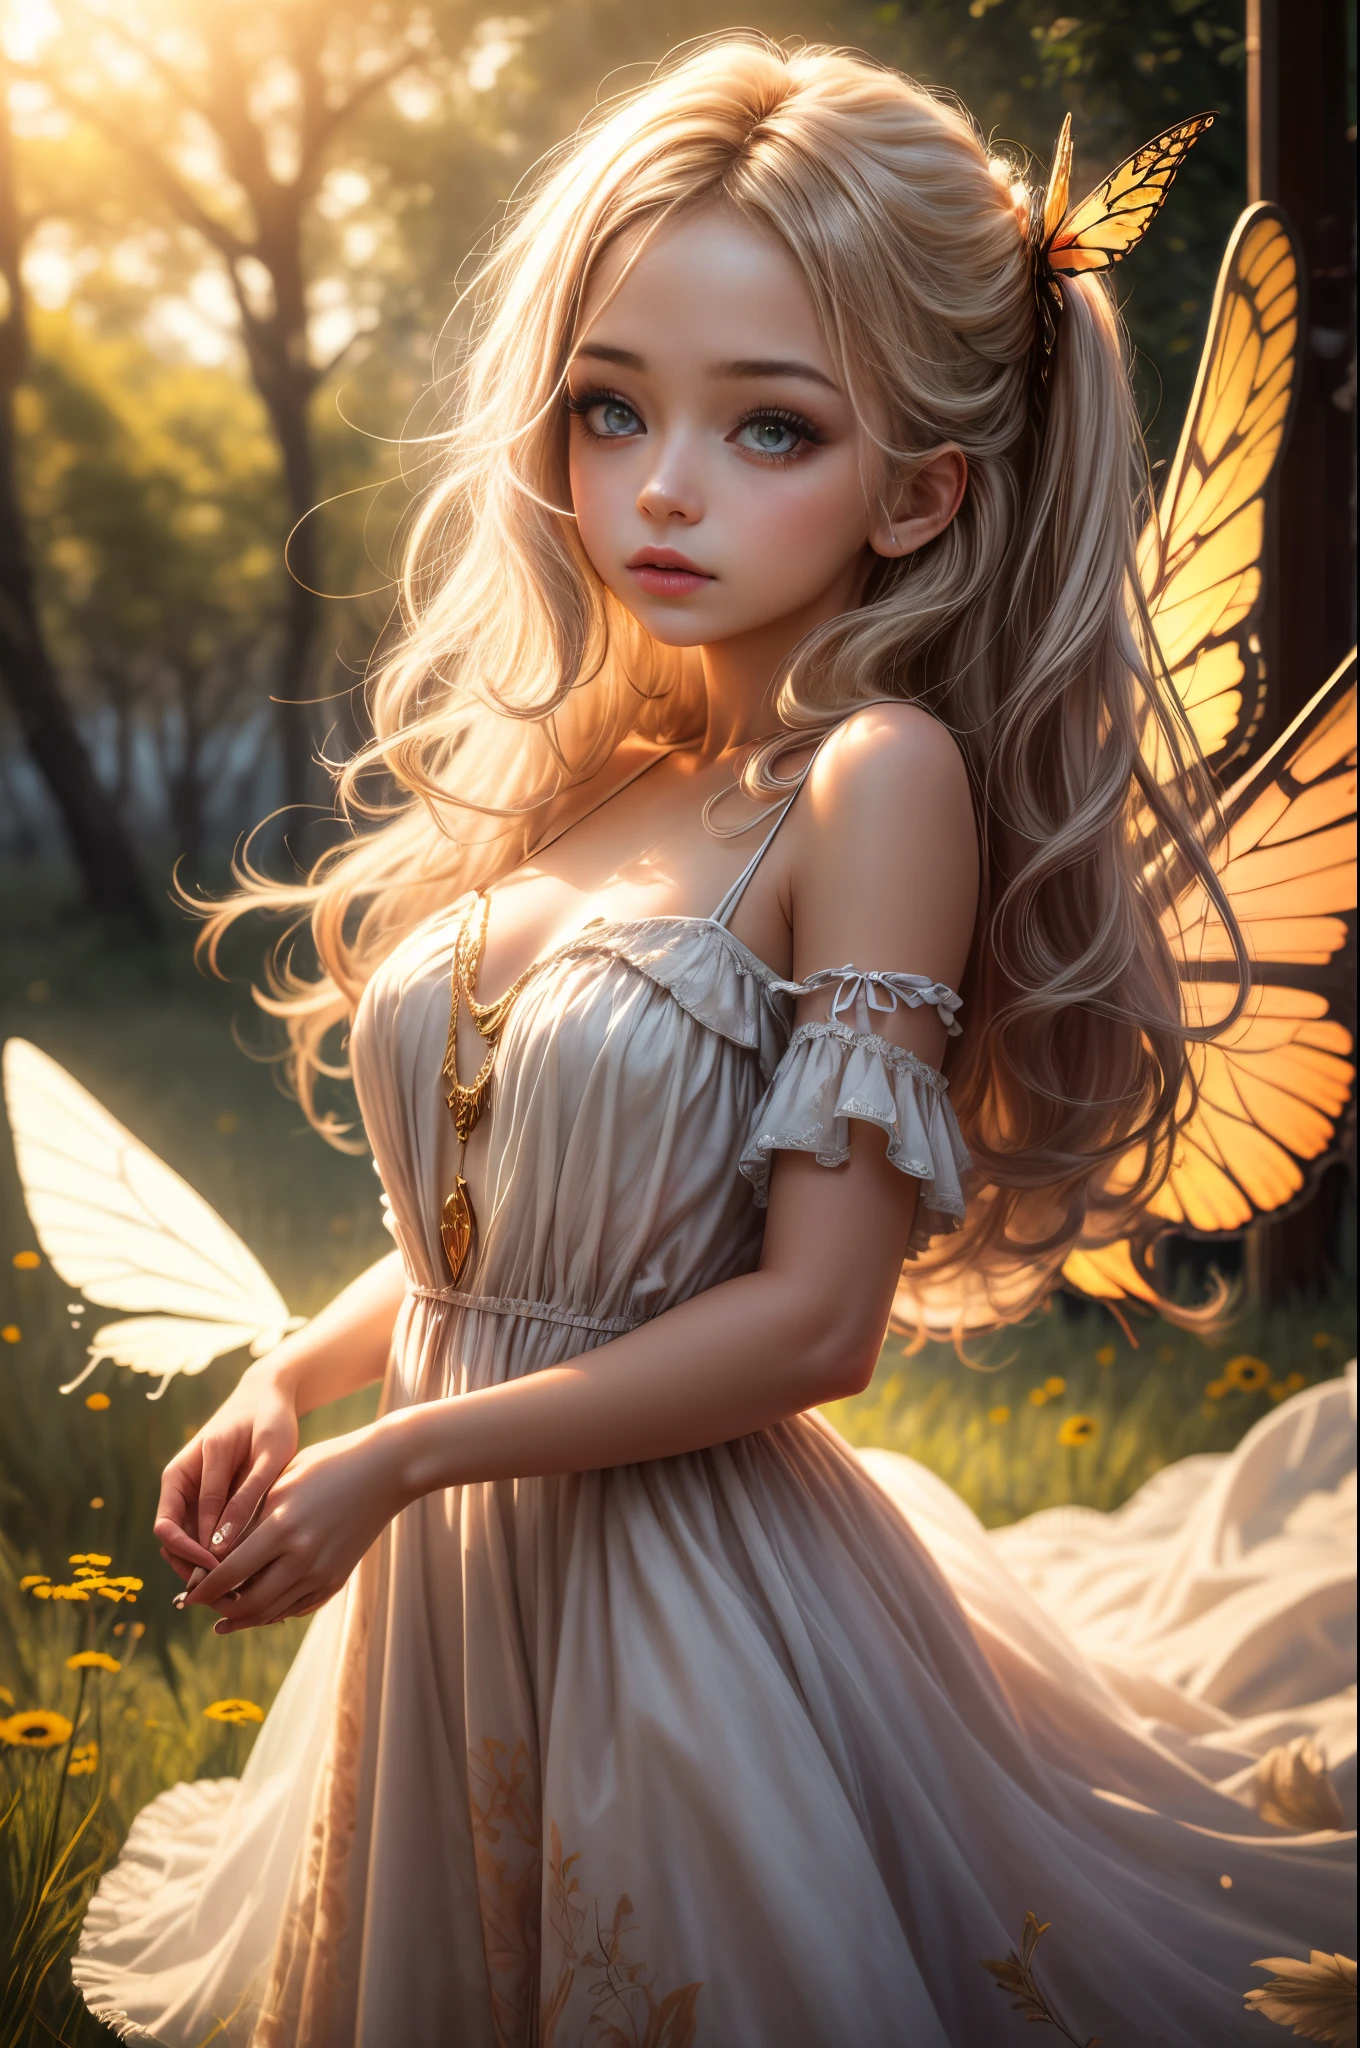 "((Innocent)) girl, golden hour, dreamy meadow, ethereal, whimsical, flowing dress, soft sunlight, enchanting, butterfly wings, (pastel clouds), liquid reflections